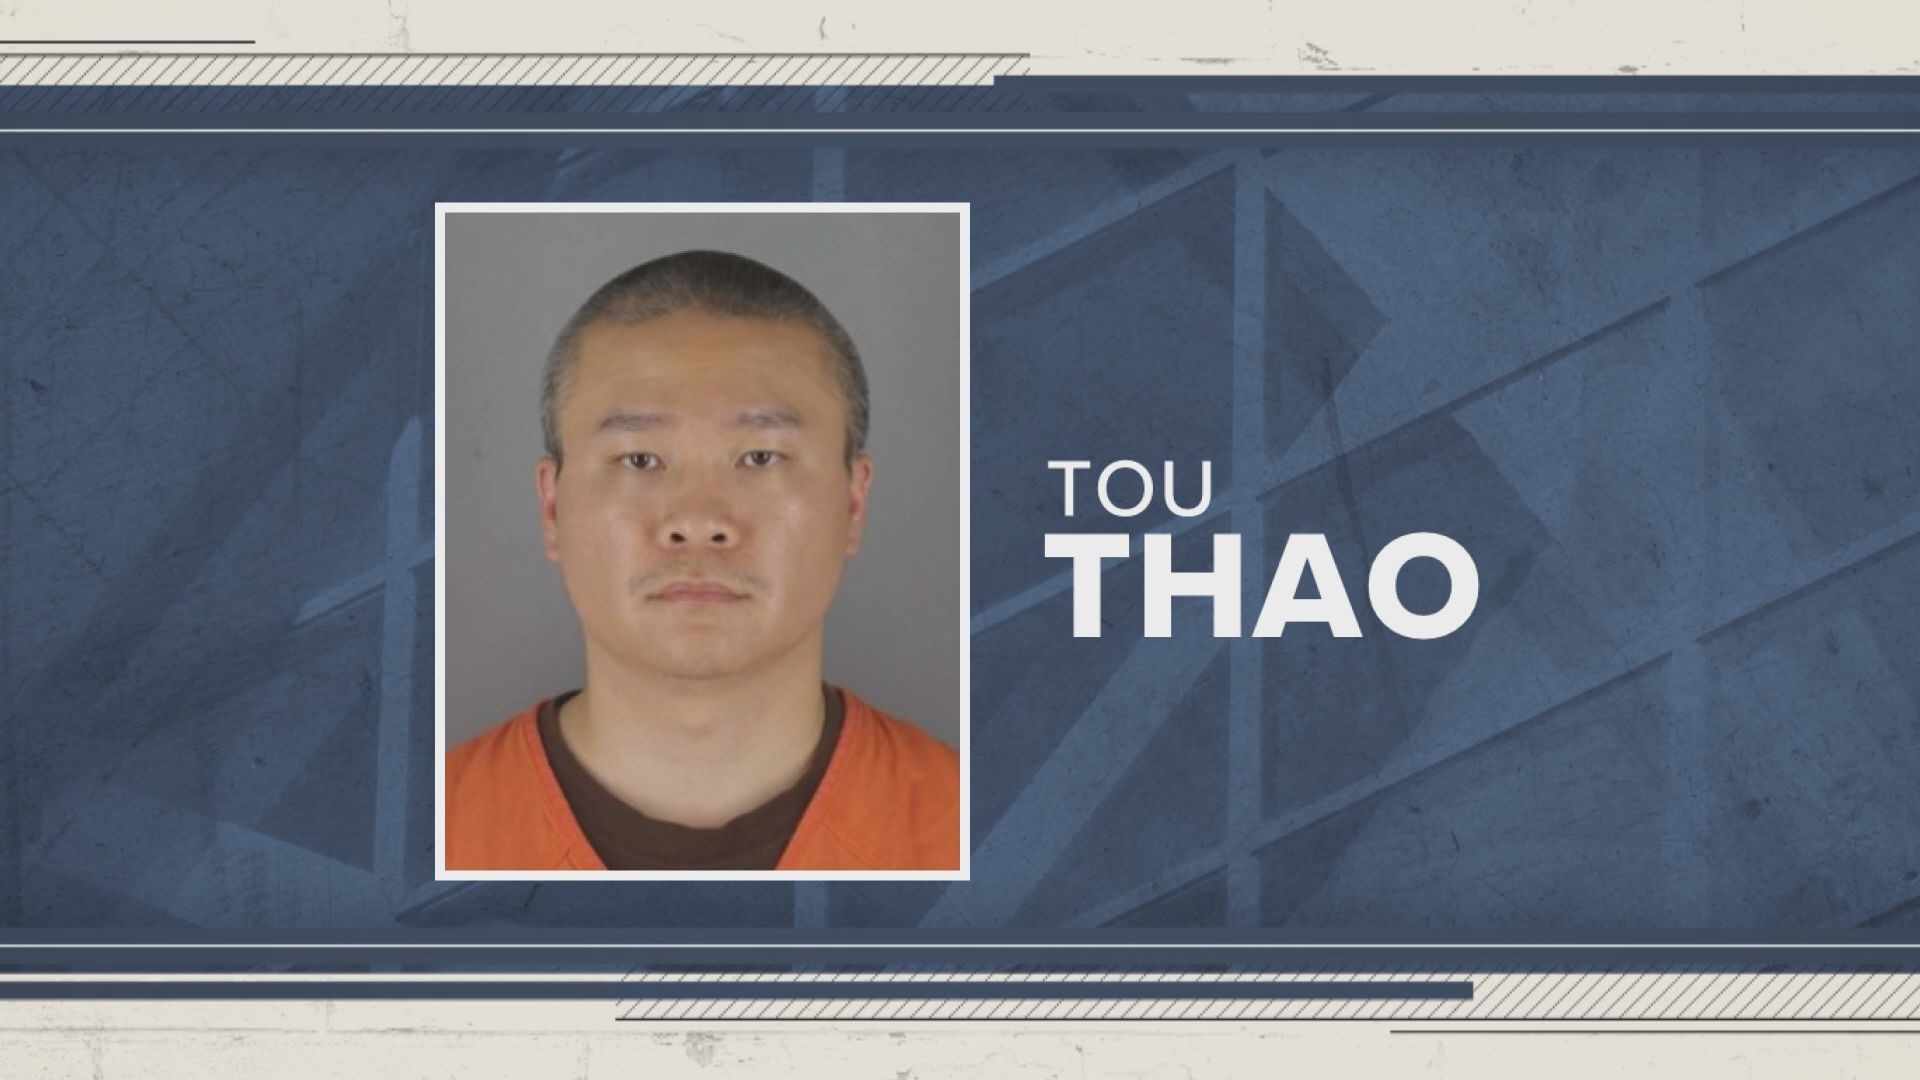 Thao was the last of four former Minneapolis police officers to face judgment on criminal charges connected to Floyd’s death in 2020.